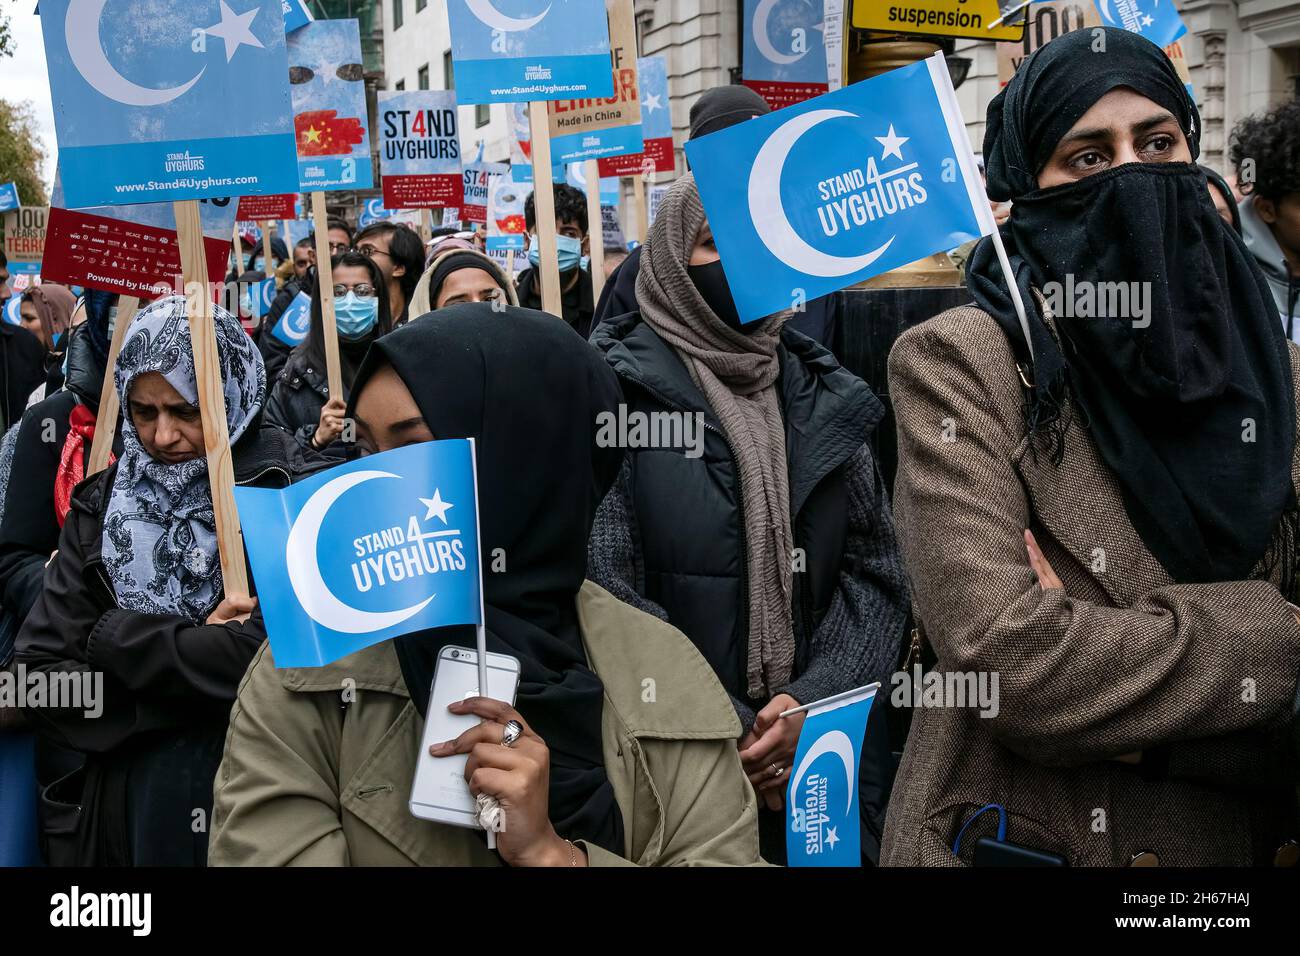 Muslims protest Uighur genocide in front of Chinese embassy - London- 13-11-202 Stock Photo